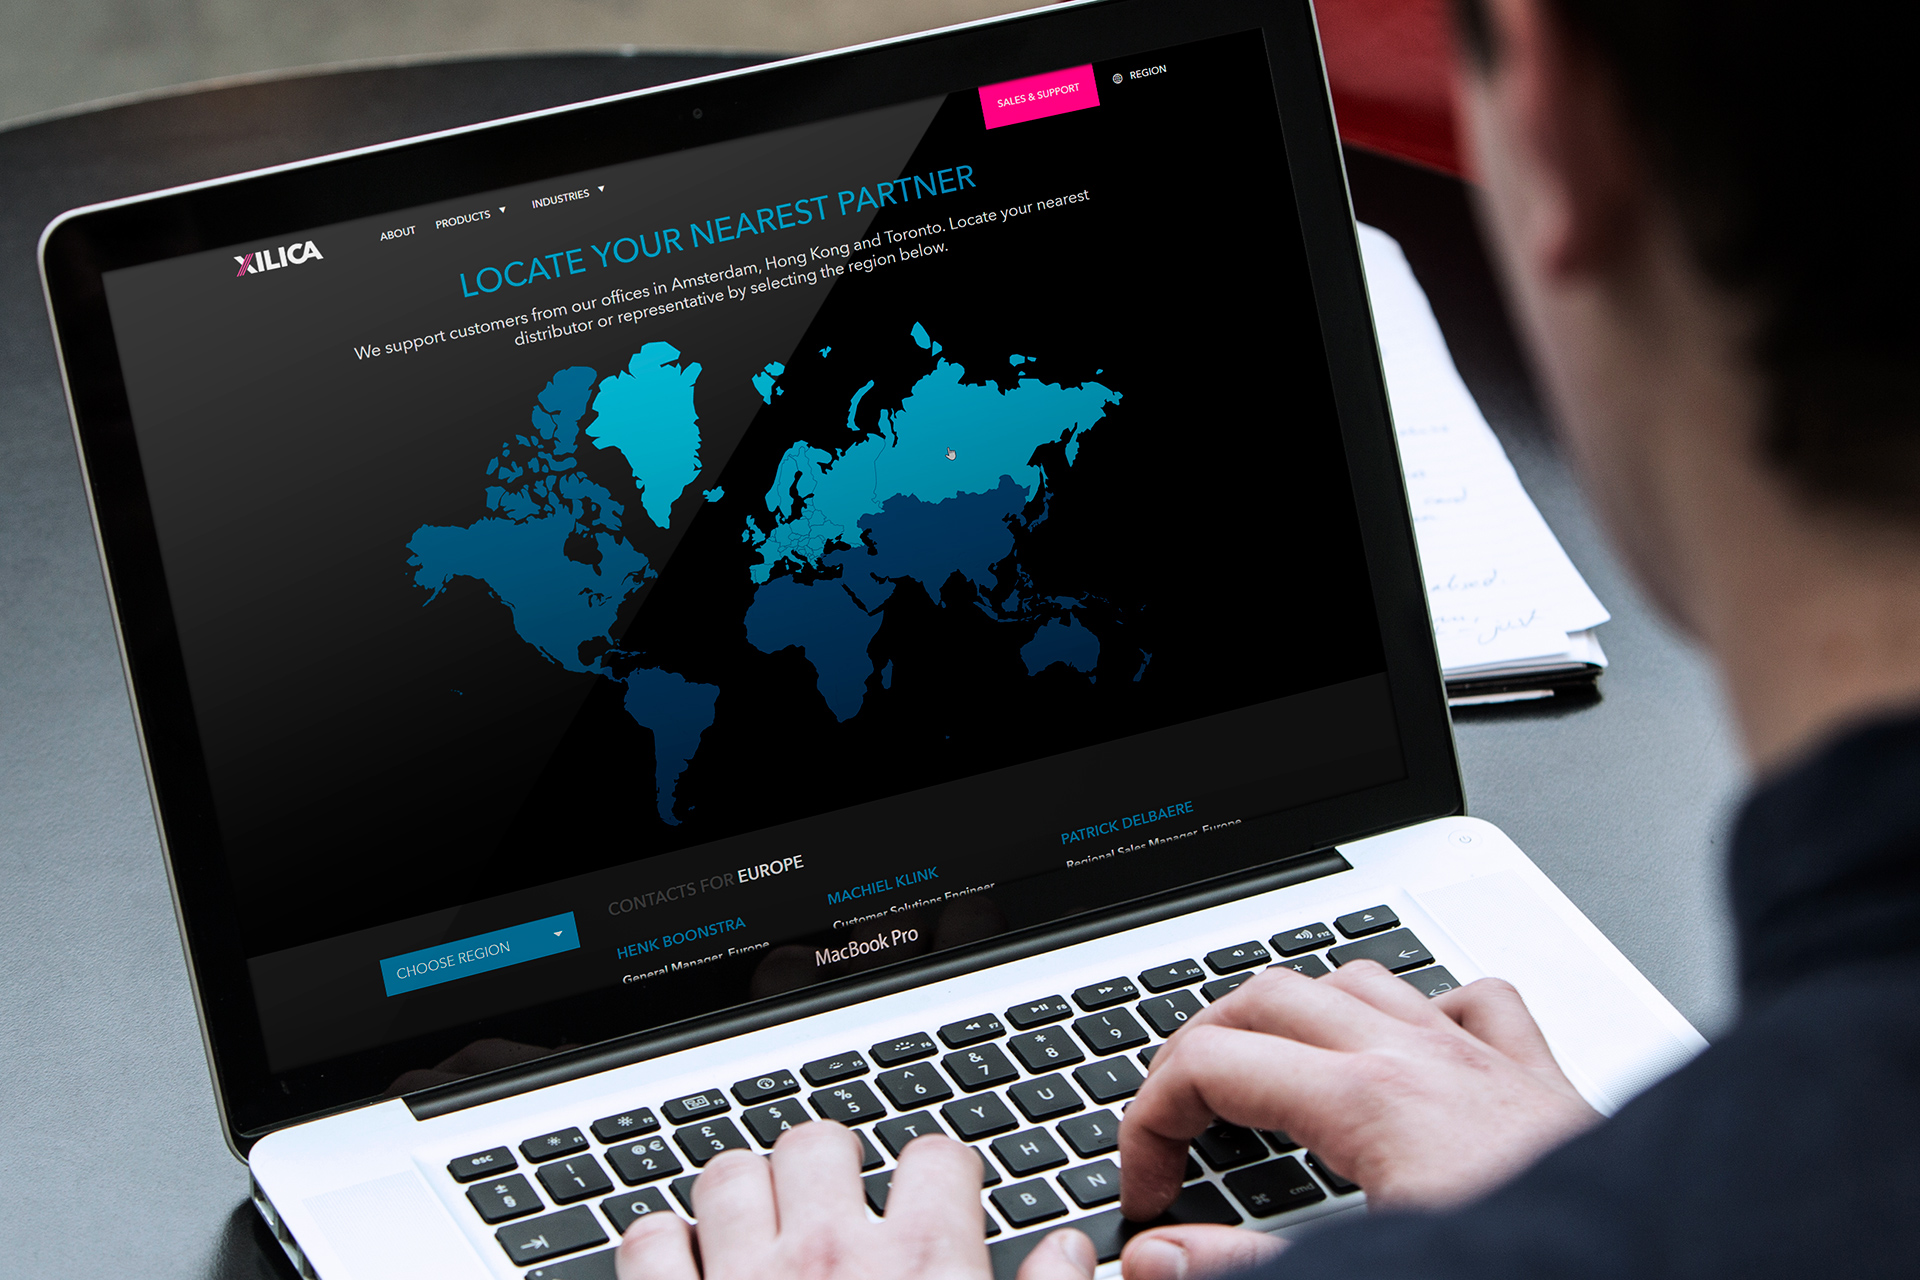 The website operates as a sales vehicle across six global regions.